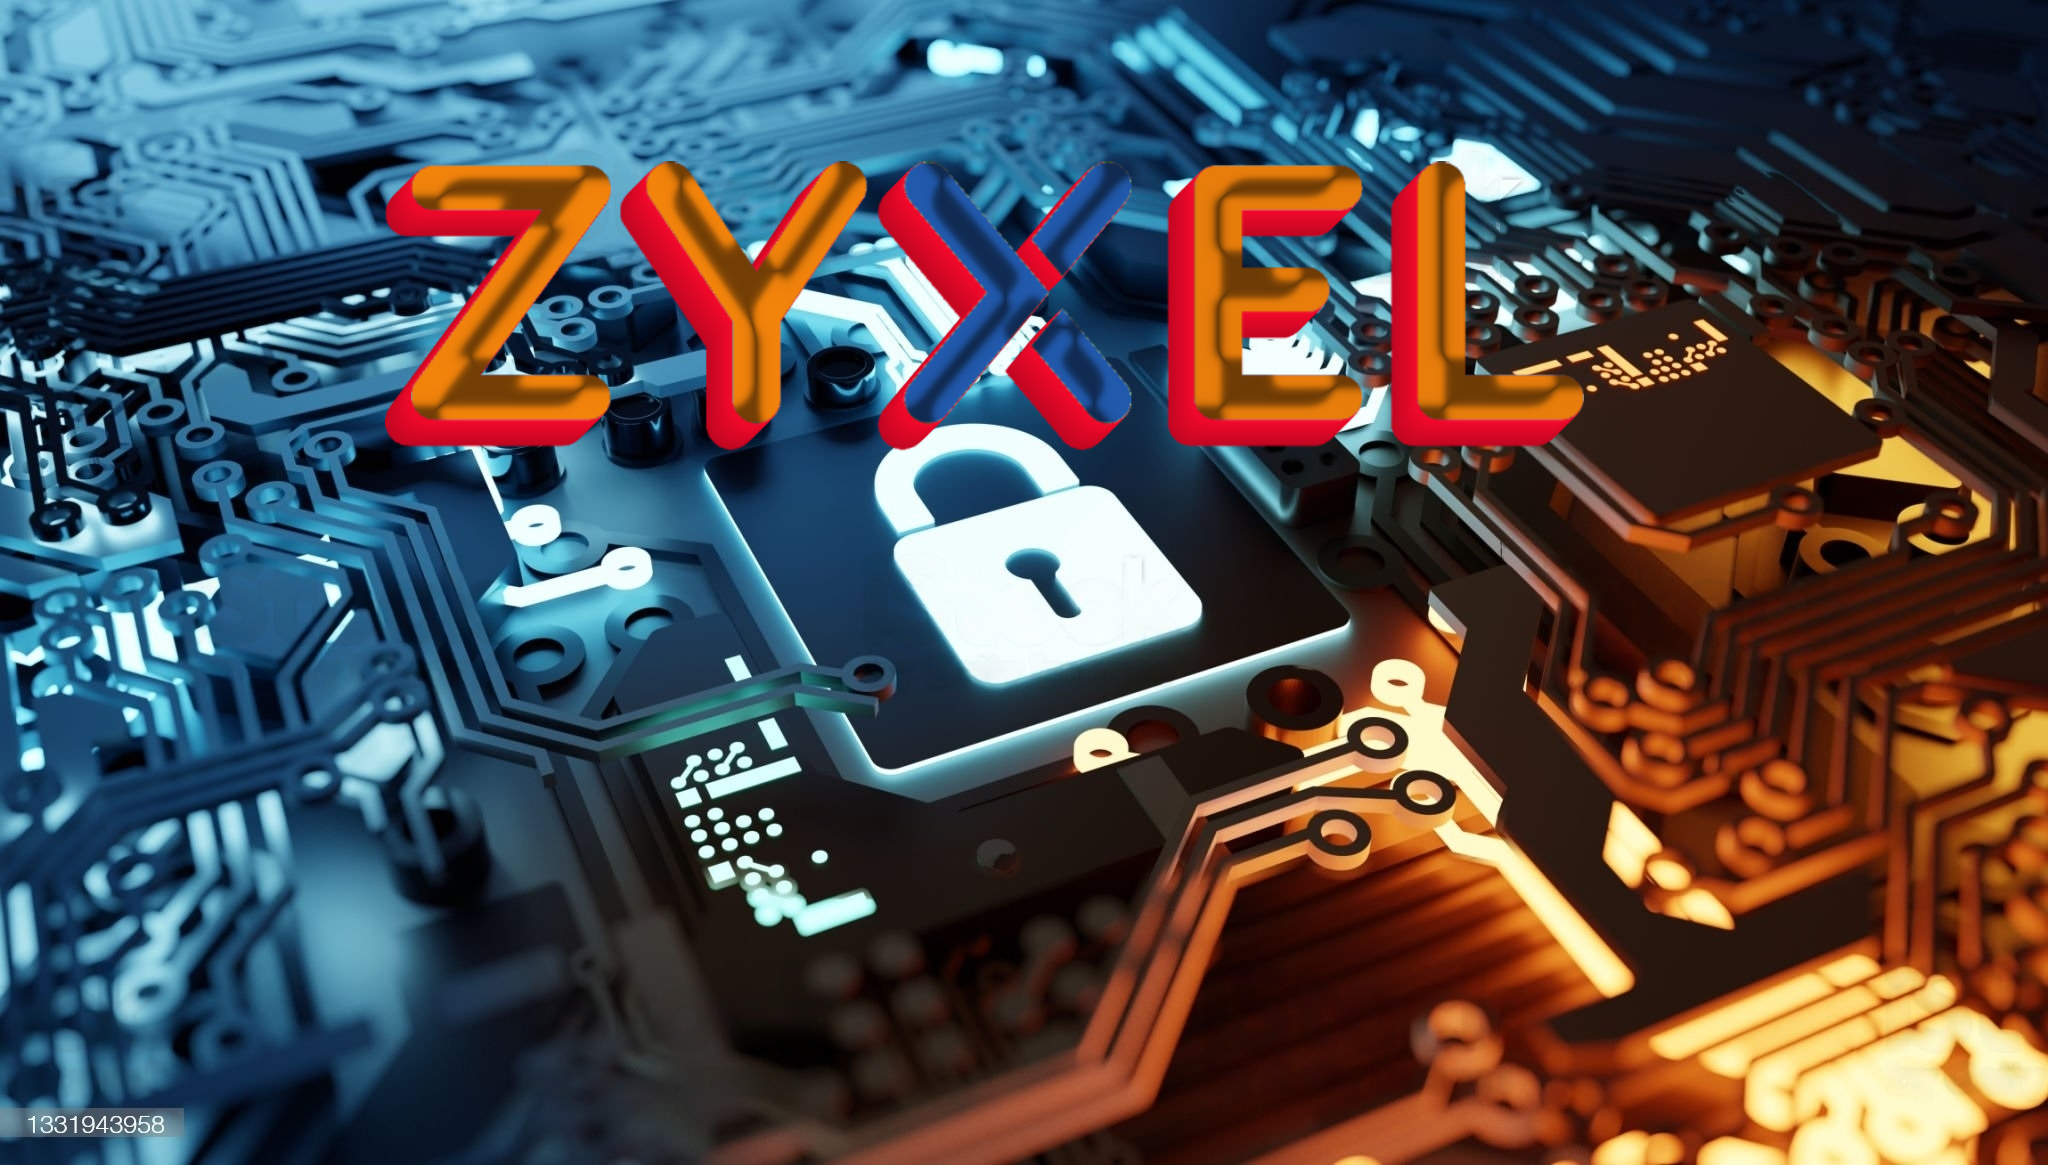 Zyxel Releases Patches for Critical Flaws in Firewall & VPN Devices